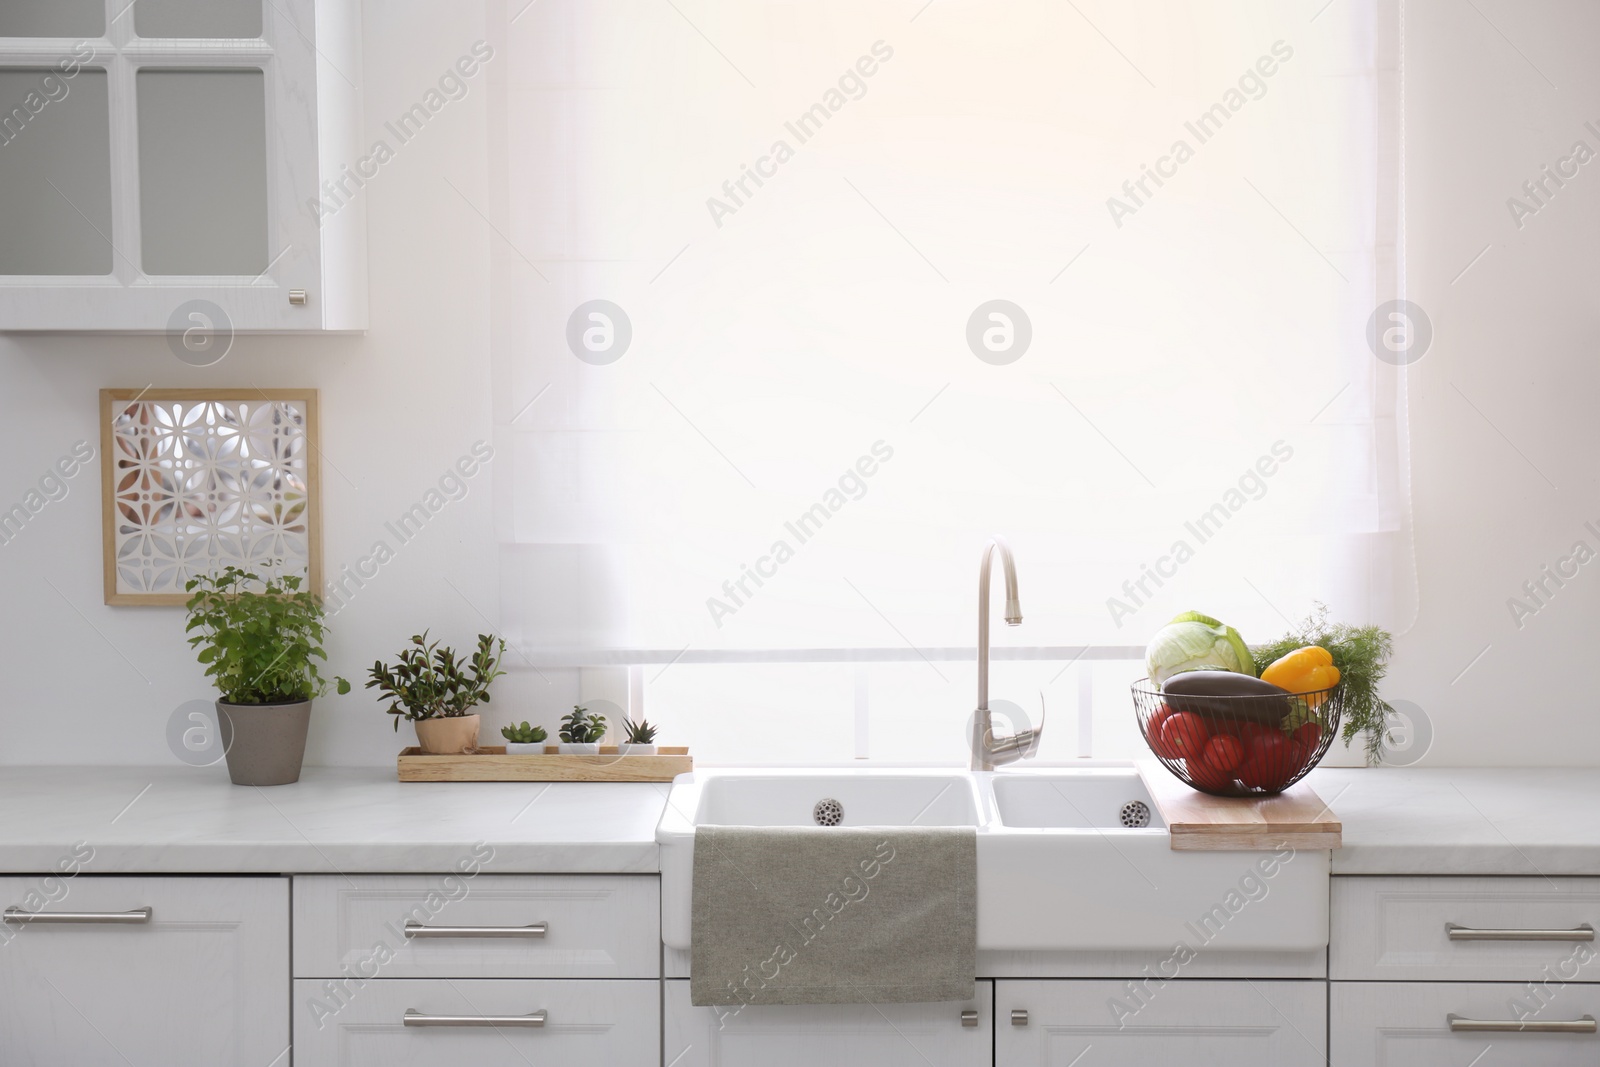 Photo of Basket full of different vegetables on wooden board in modern kitchen